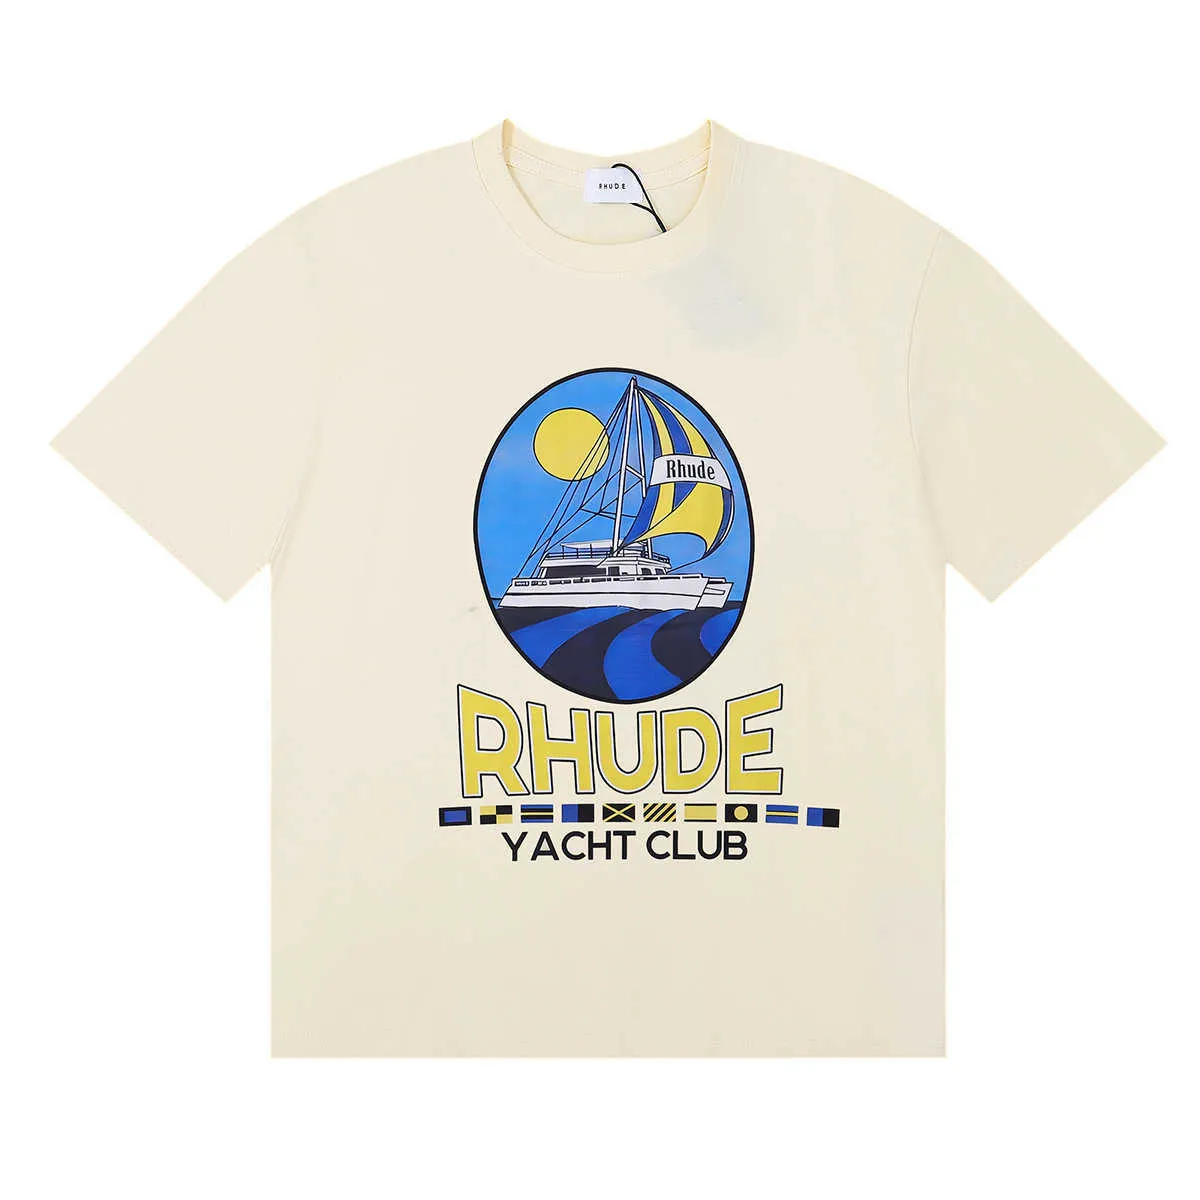 Meichao Rhude Yacht Club Yacht Club Printed Short sleeved T-shirt for Men and Women High Street Half sleeved Fashion